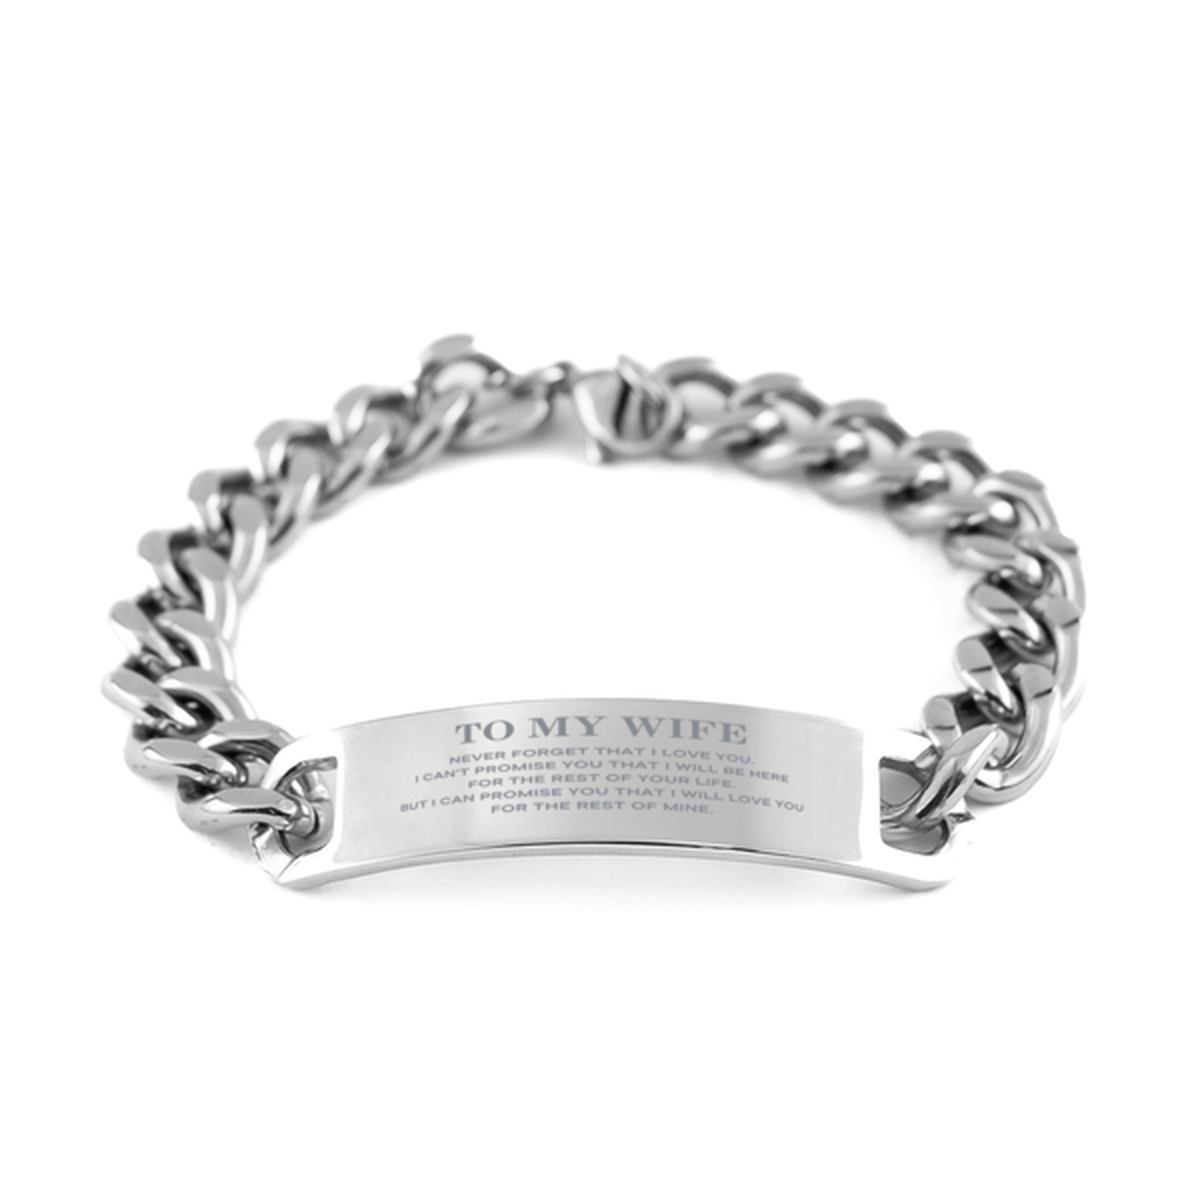 To My Wife Gifts, I will love you for the rest of mine, Love Wife Bracelet, Birthday Christmas Unique Cuban Chain Stainless Steel Bracelet For Wife